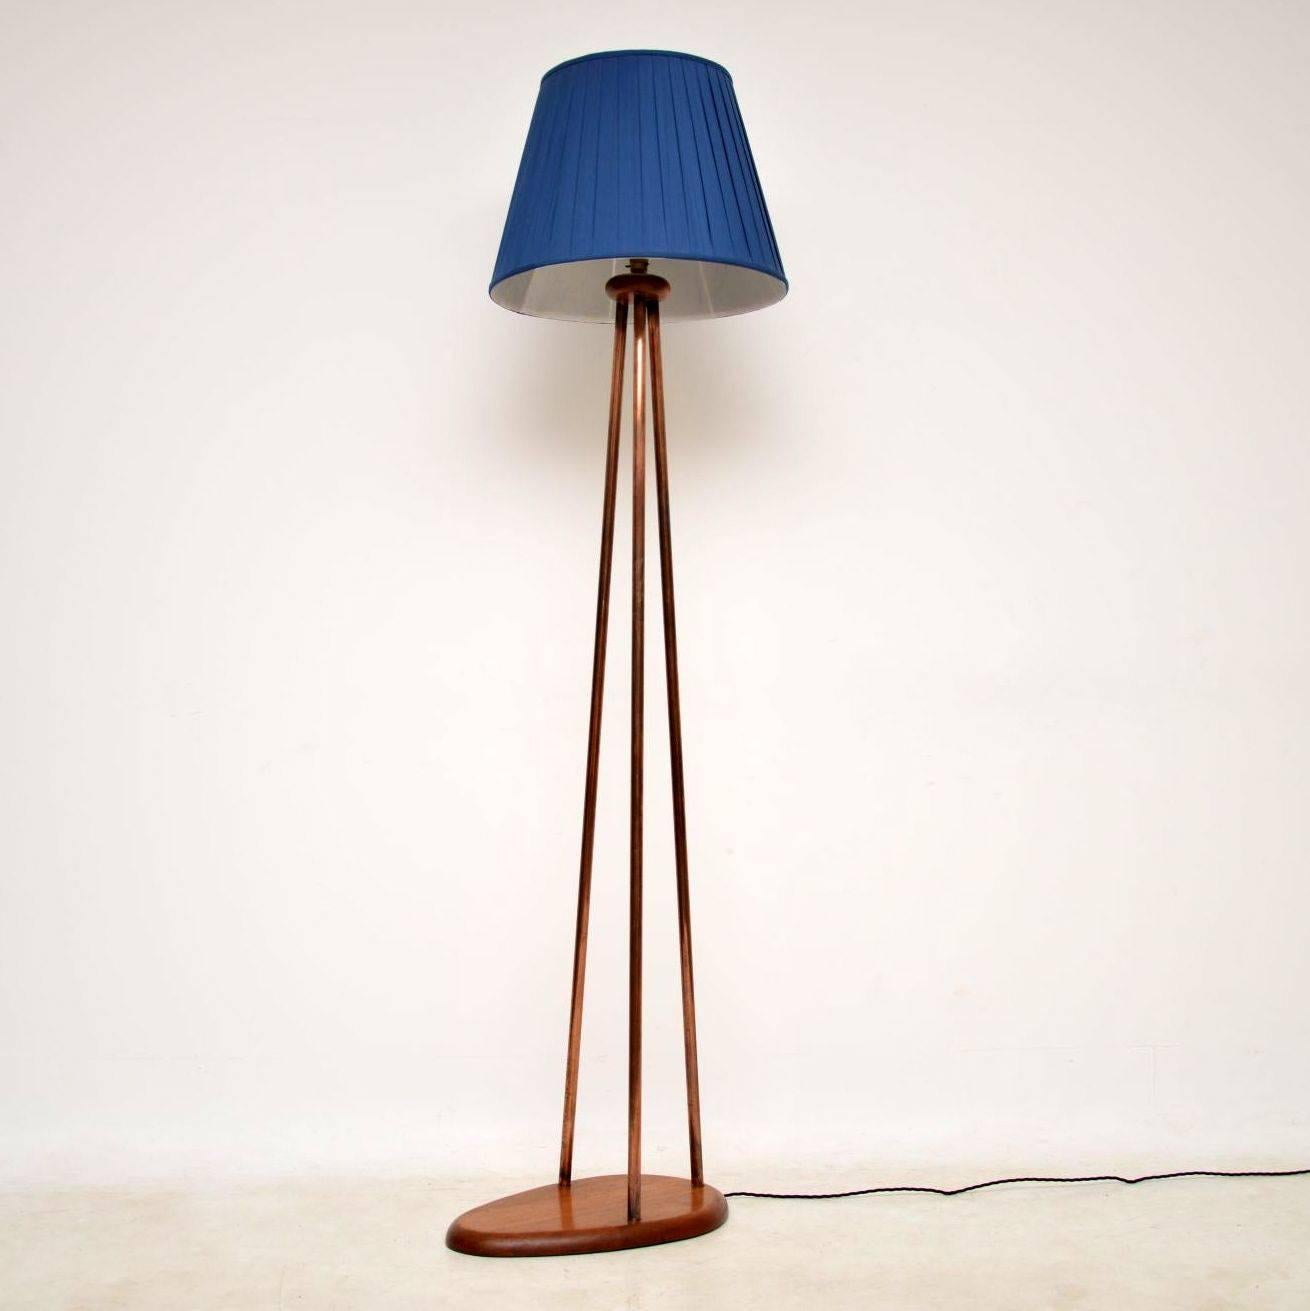 A very stylish and unusual vintage lamp, this dates from around the 1960’s. It has a tripod stand made from copper, which sits on a solid wood base that looks like it’s mahogany, the copper is also joined at the top by a mahogany disc. The condition